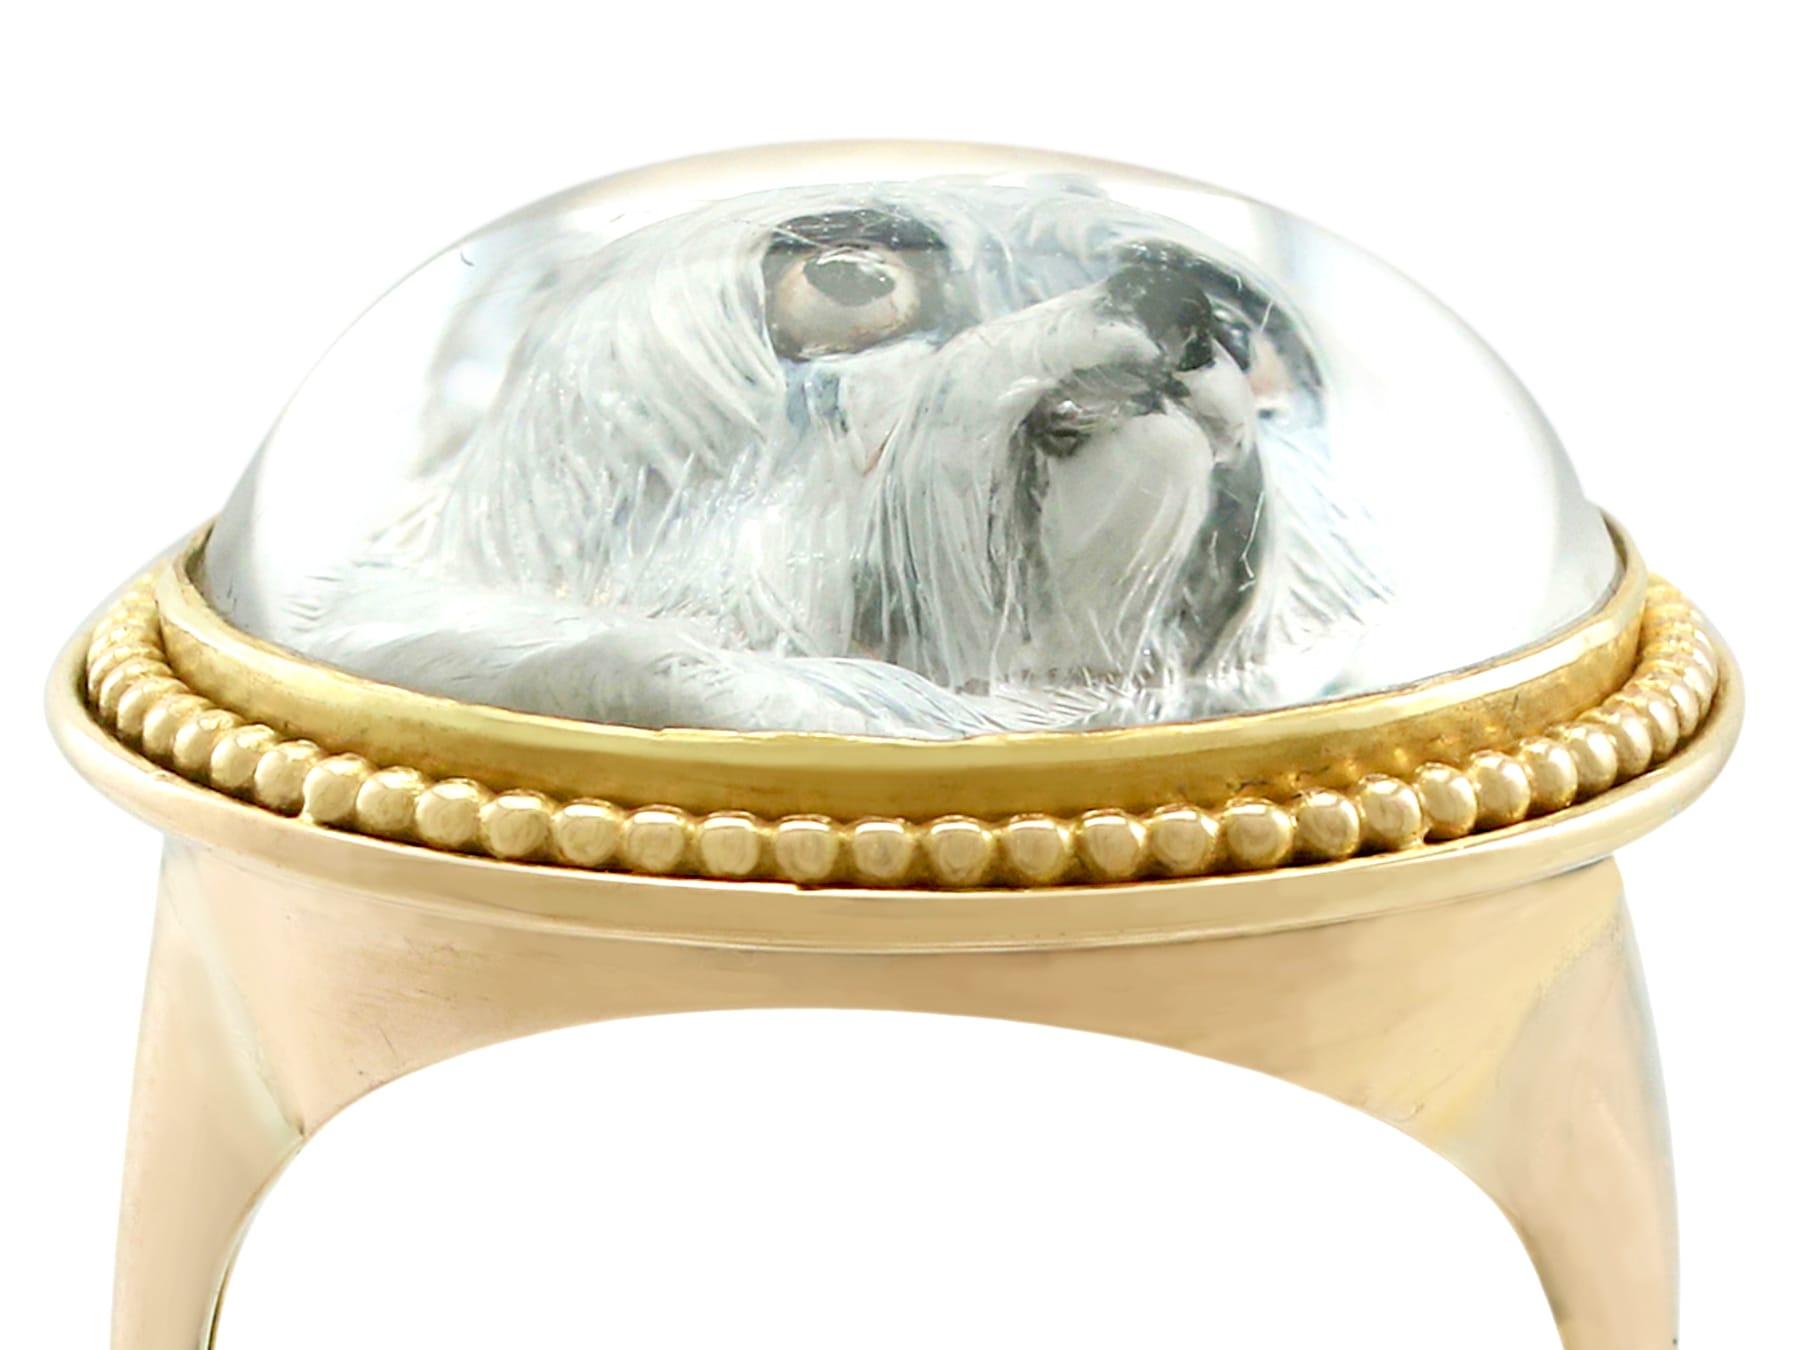 An impressive Essex crystal reverse intaglio and 9 karat yellow gold cocktail ring; part of our diverse antique jewelry and estate jewelry collections.

This impressive Essex crystal reverse intaglio and 9 karat yellow gold cocktail ring; part of